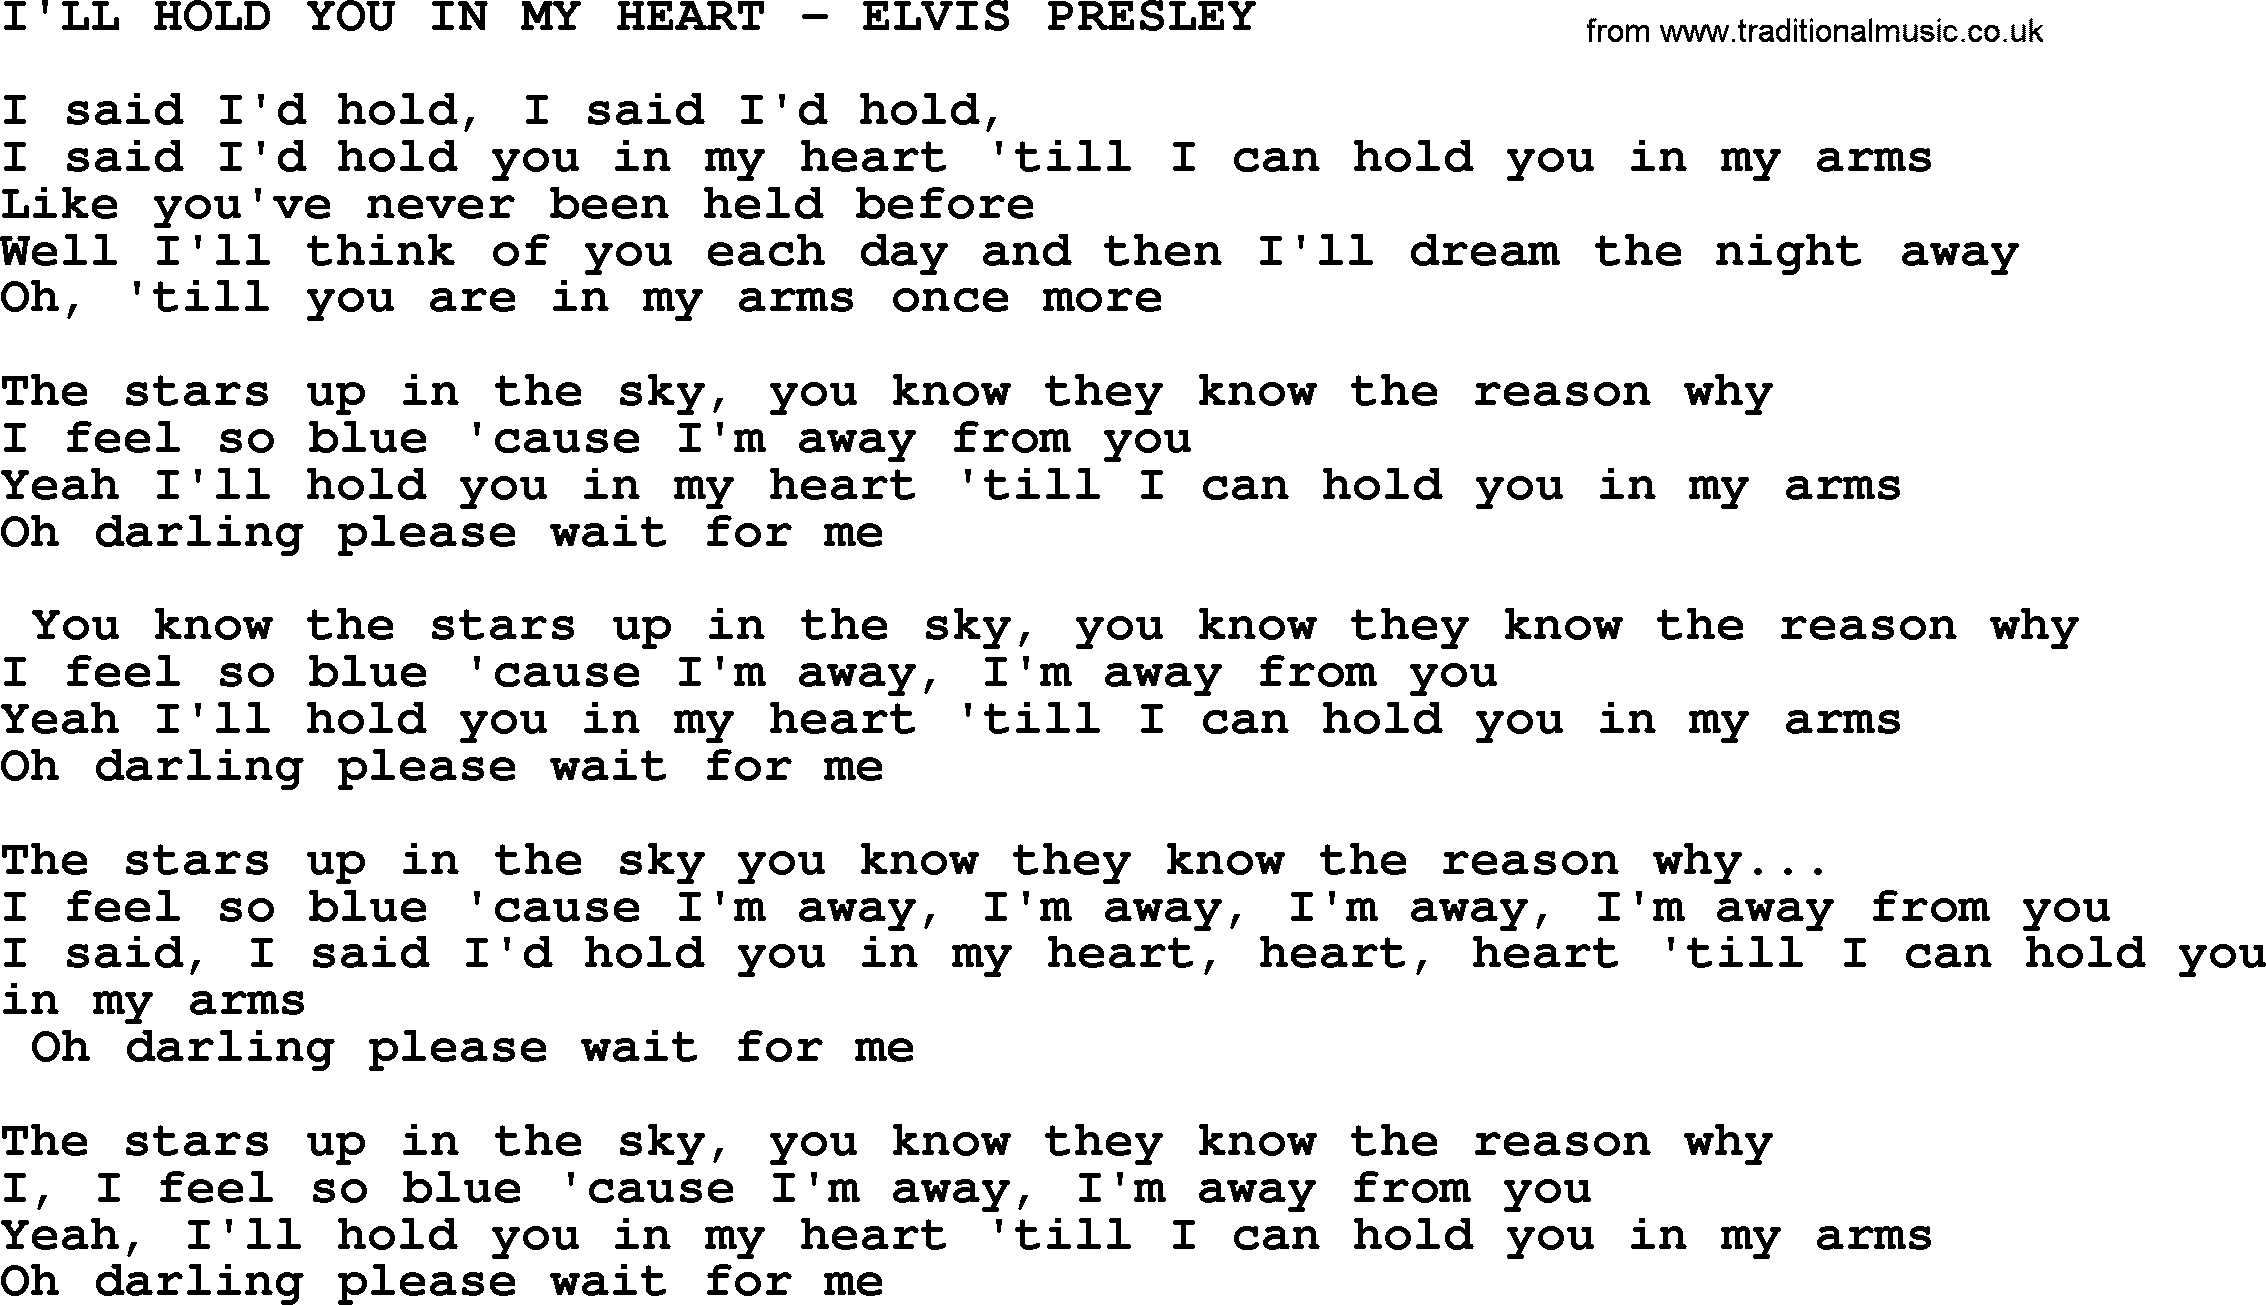 Elvis Presley song: I'll Hold You In My Heart-Elvis Presley-.txt lyrics and chords